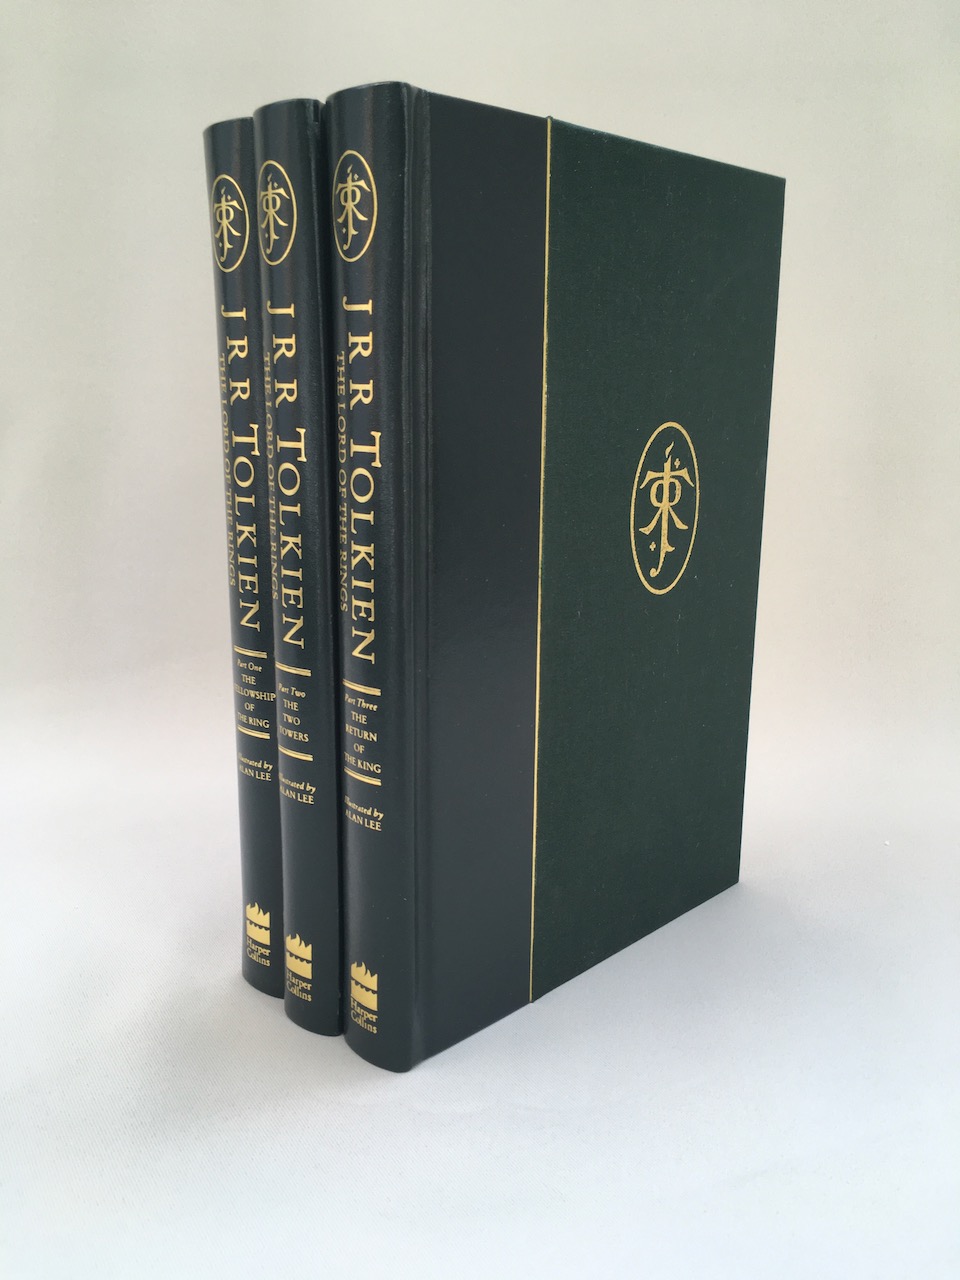  1992, The Lord of the Rings. Signed Alan Lee 3 volume Deluxe Limited Edition 13